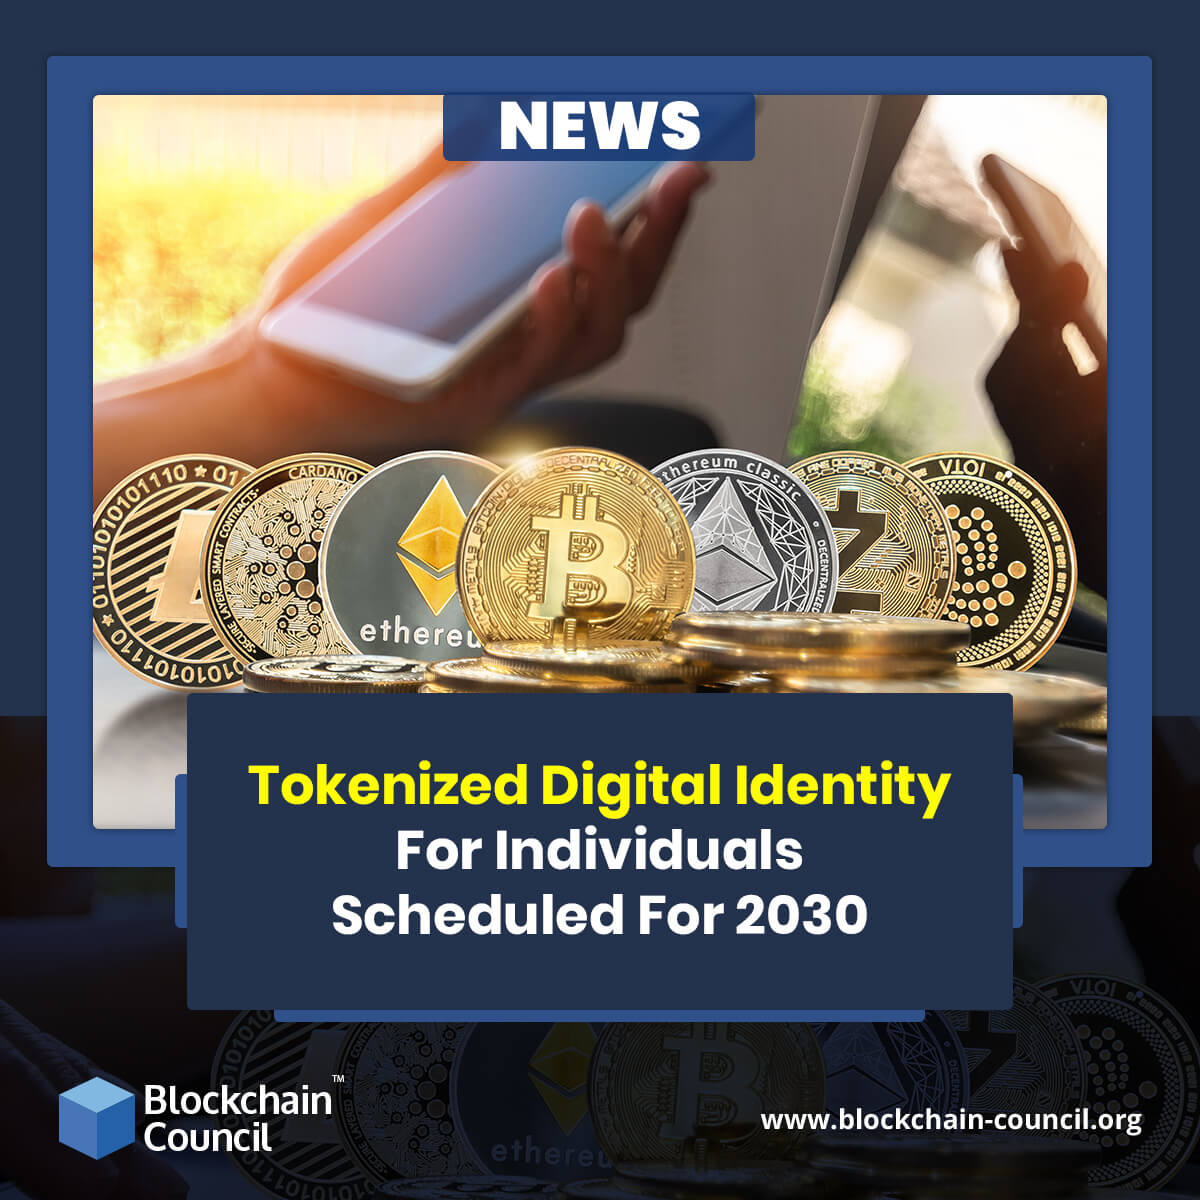 Tokenized Digital Identity For Individuals Scheduled For 2030